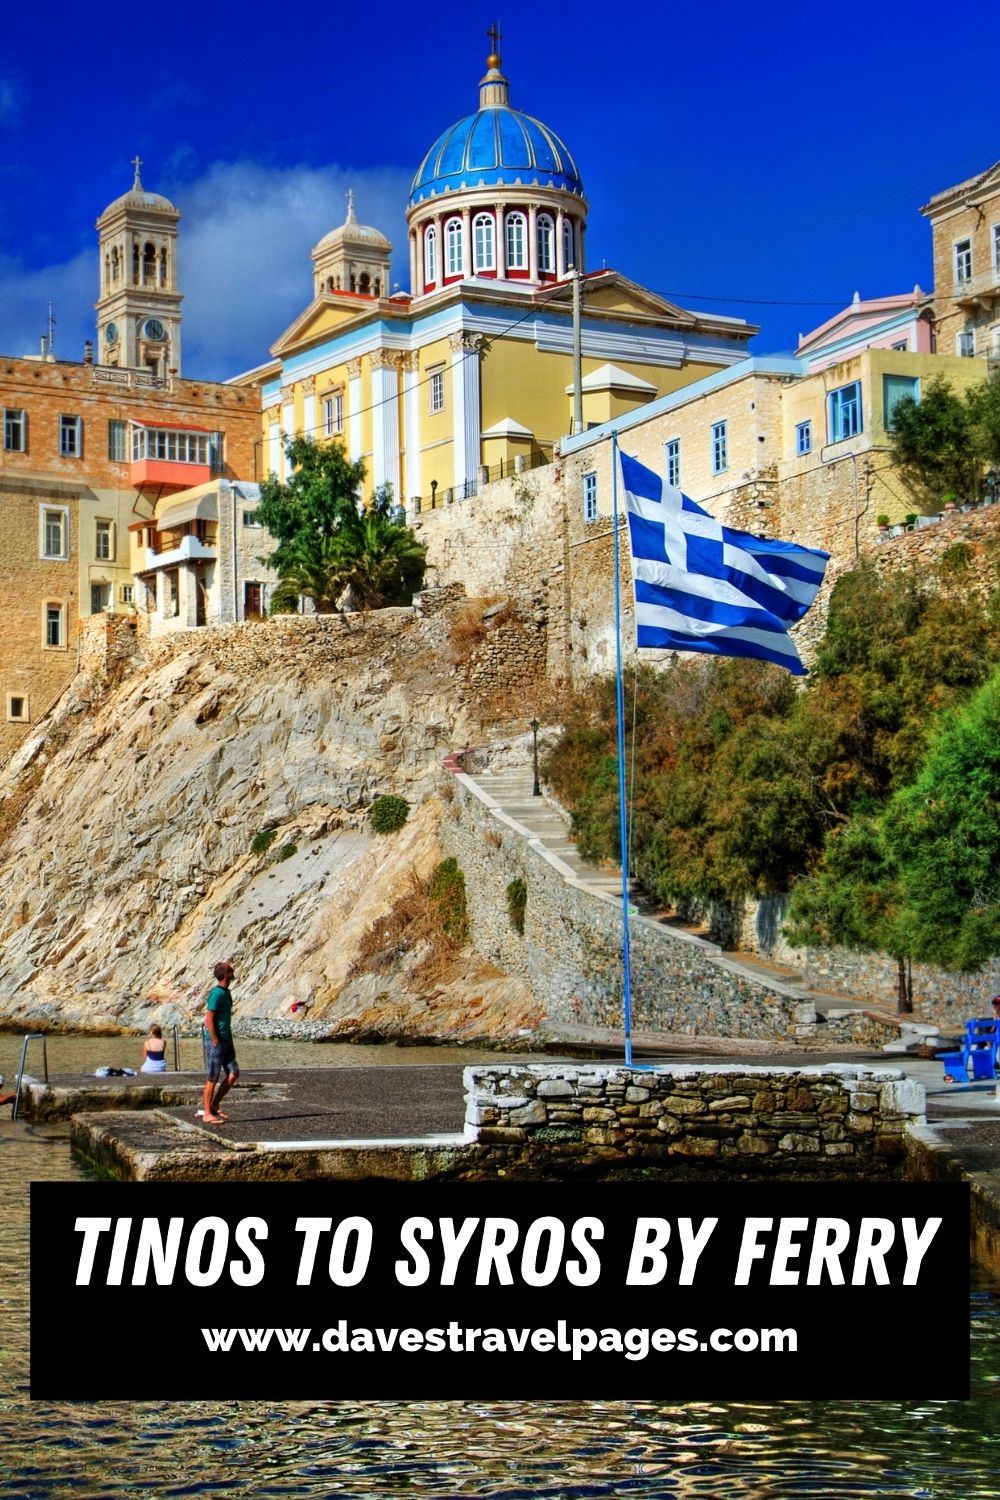 Taking the ferry from Tinos to Syros